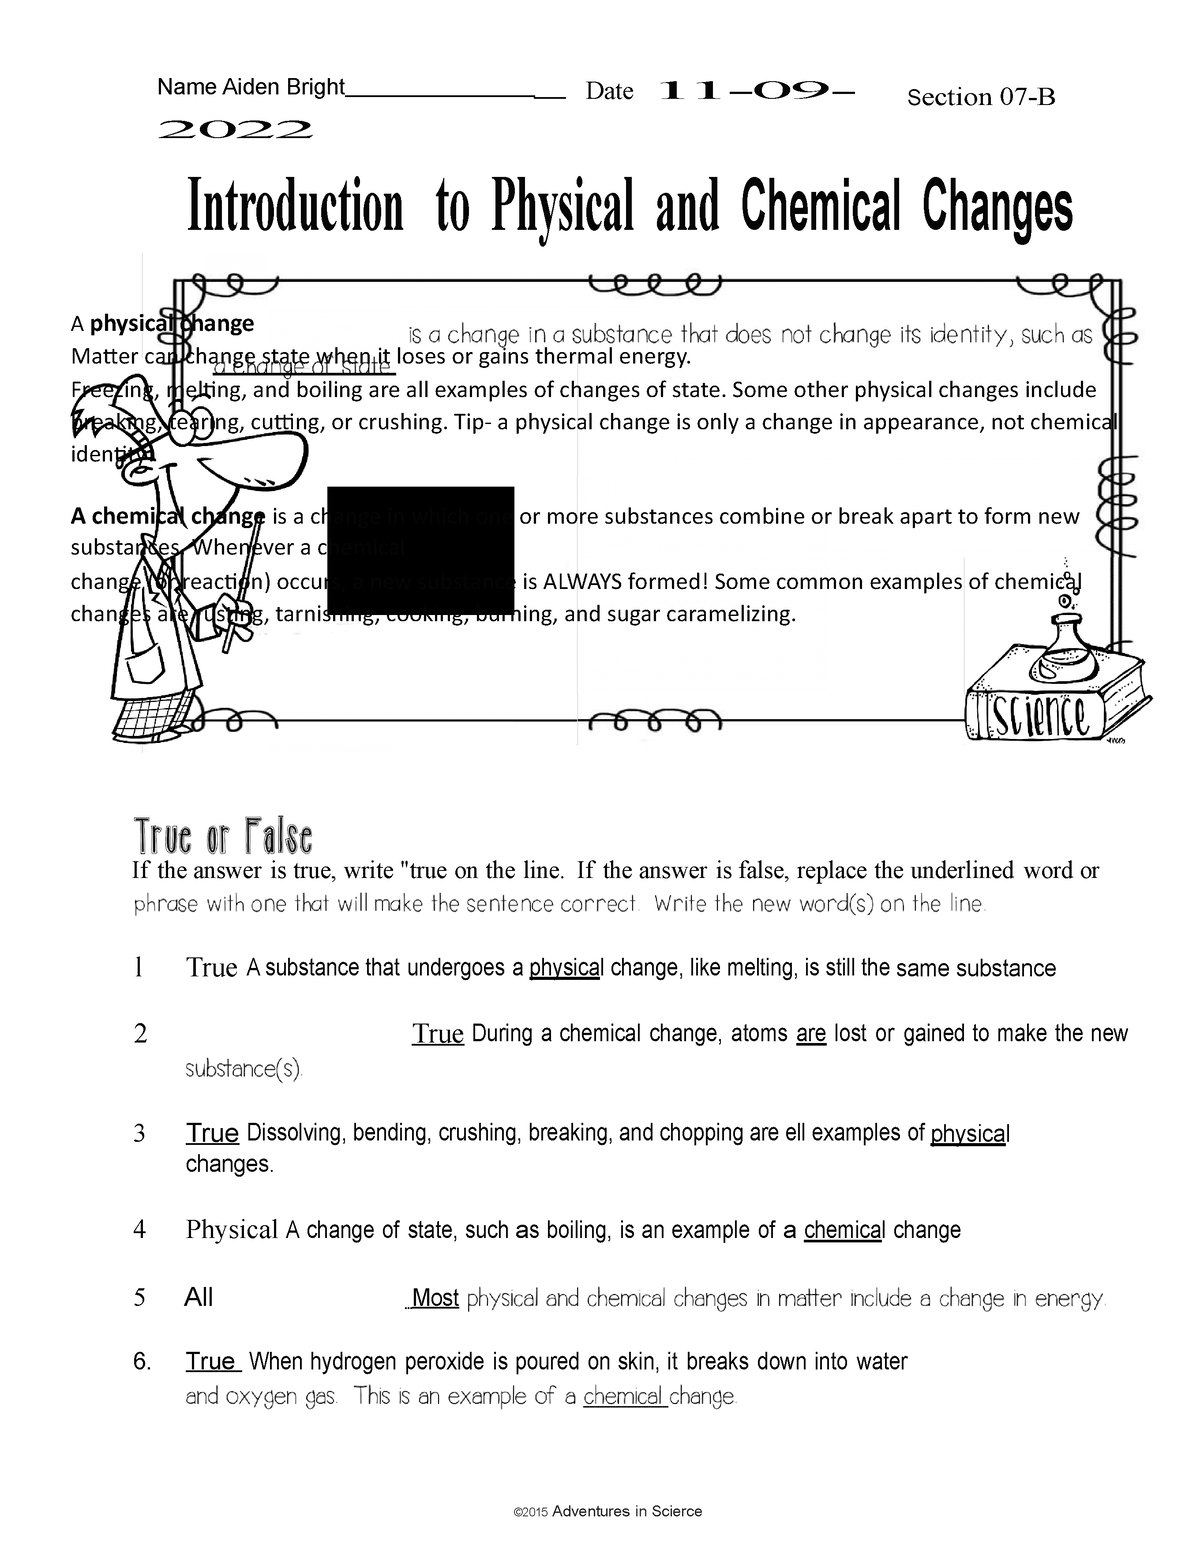 physical-and-chemical-changes-intro-worksheet-a-physical-change-matter-can-change-state-when